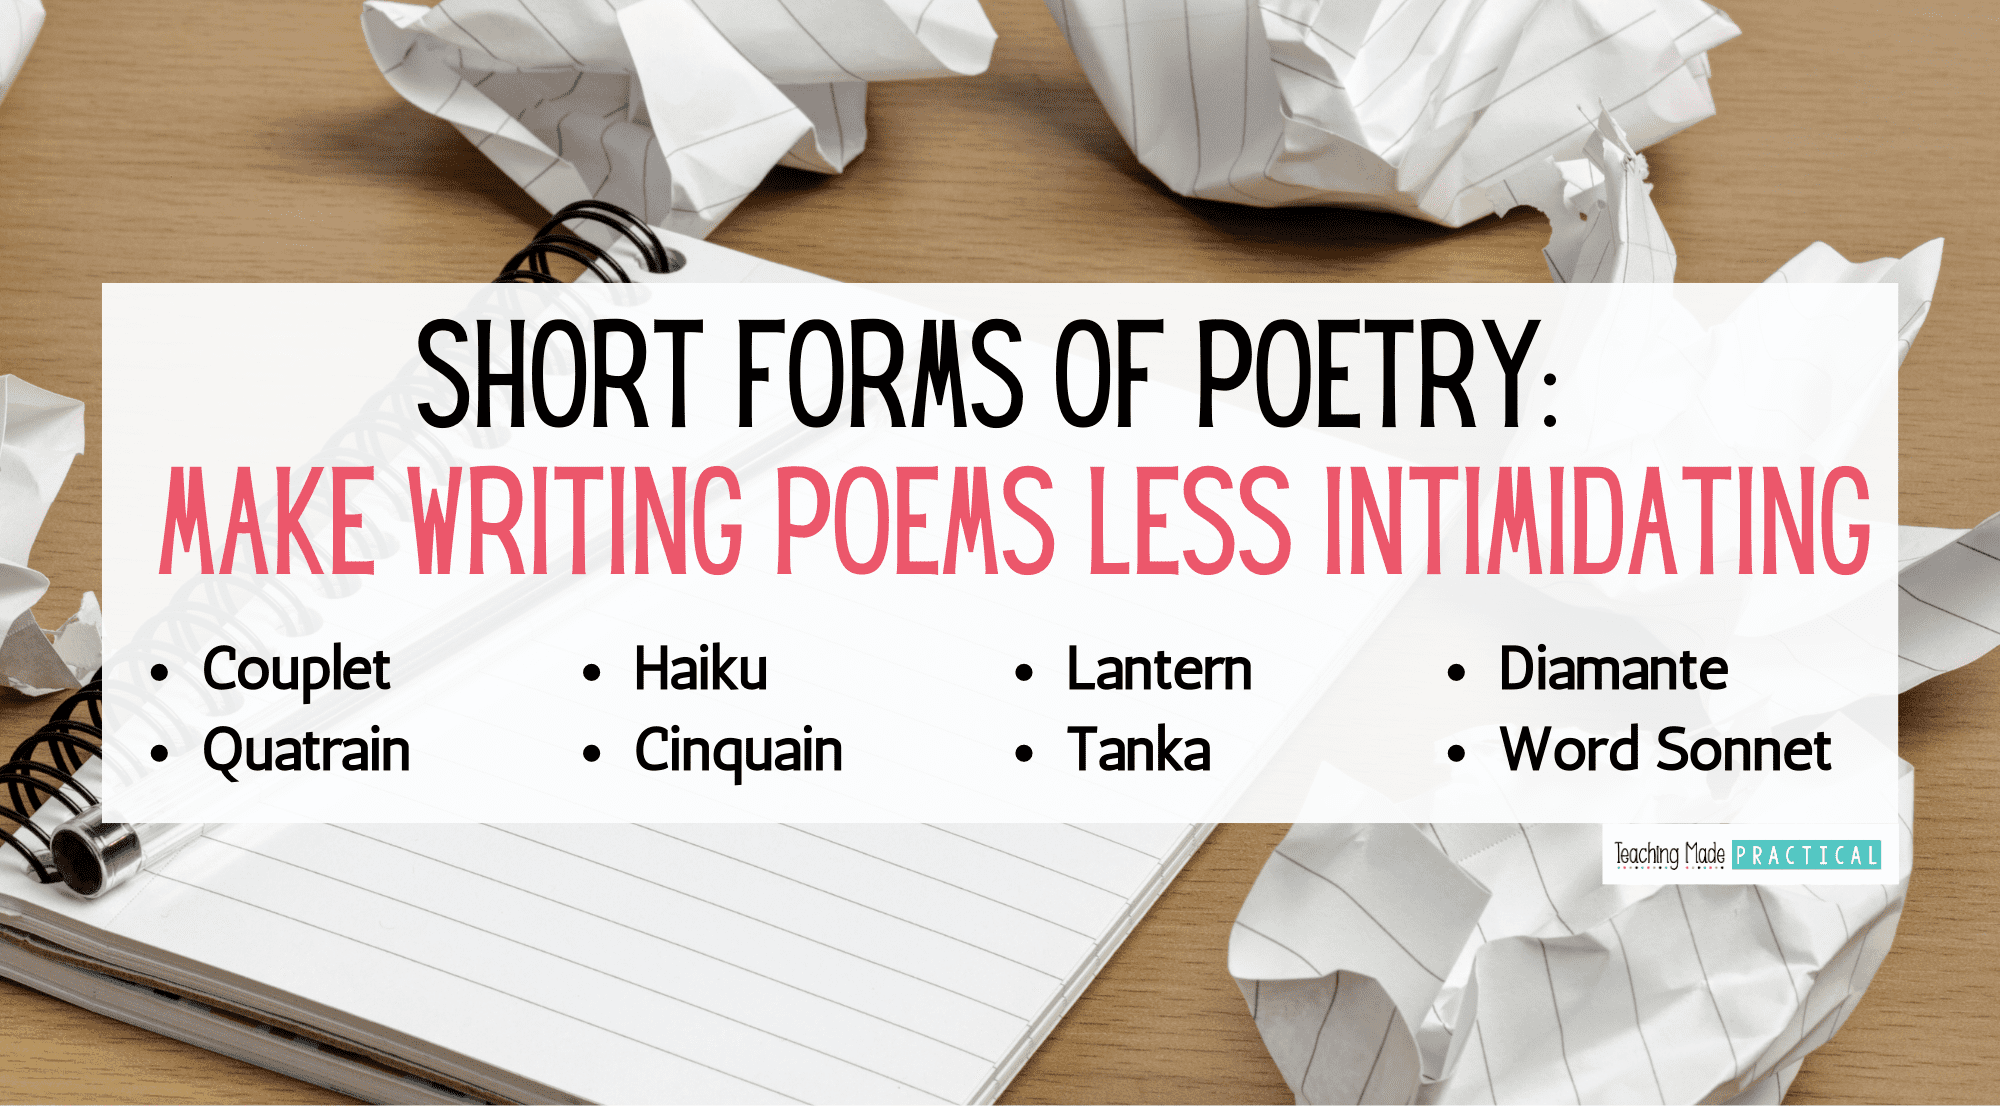 Short Forms of Poetry to Make Writing Poems Less Intimiadting